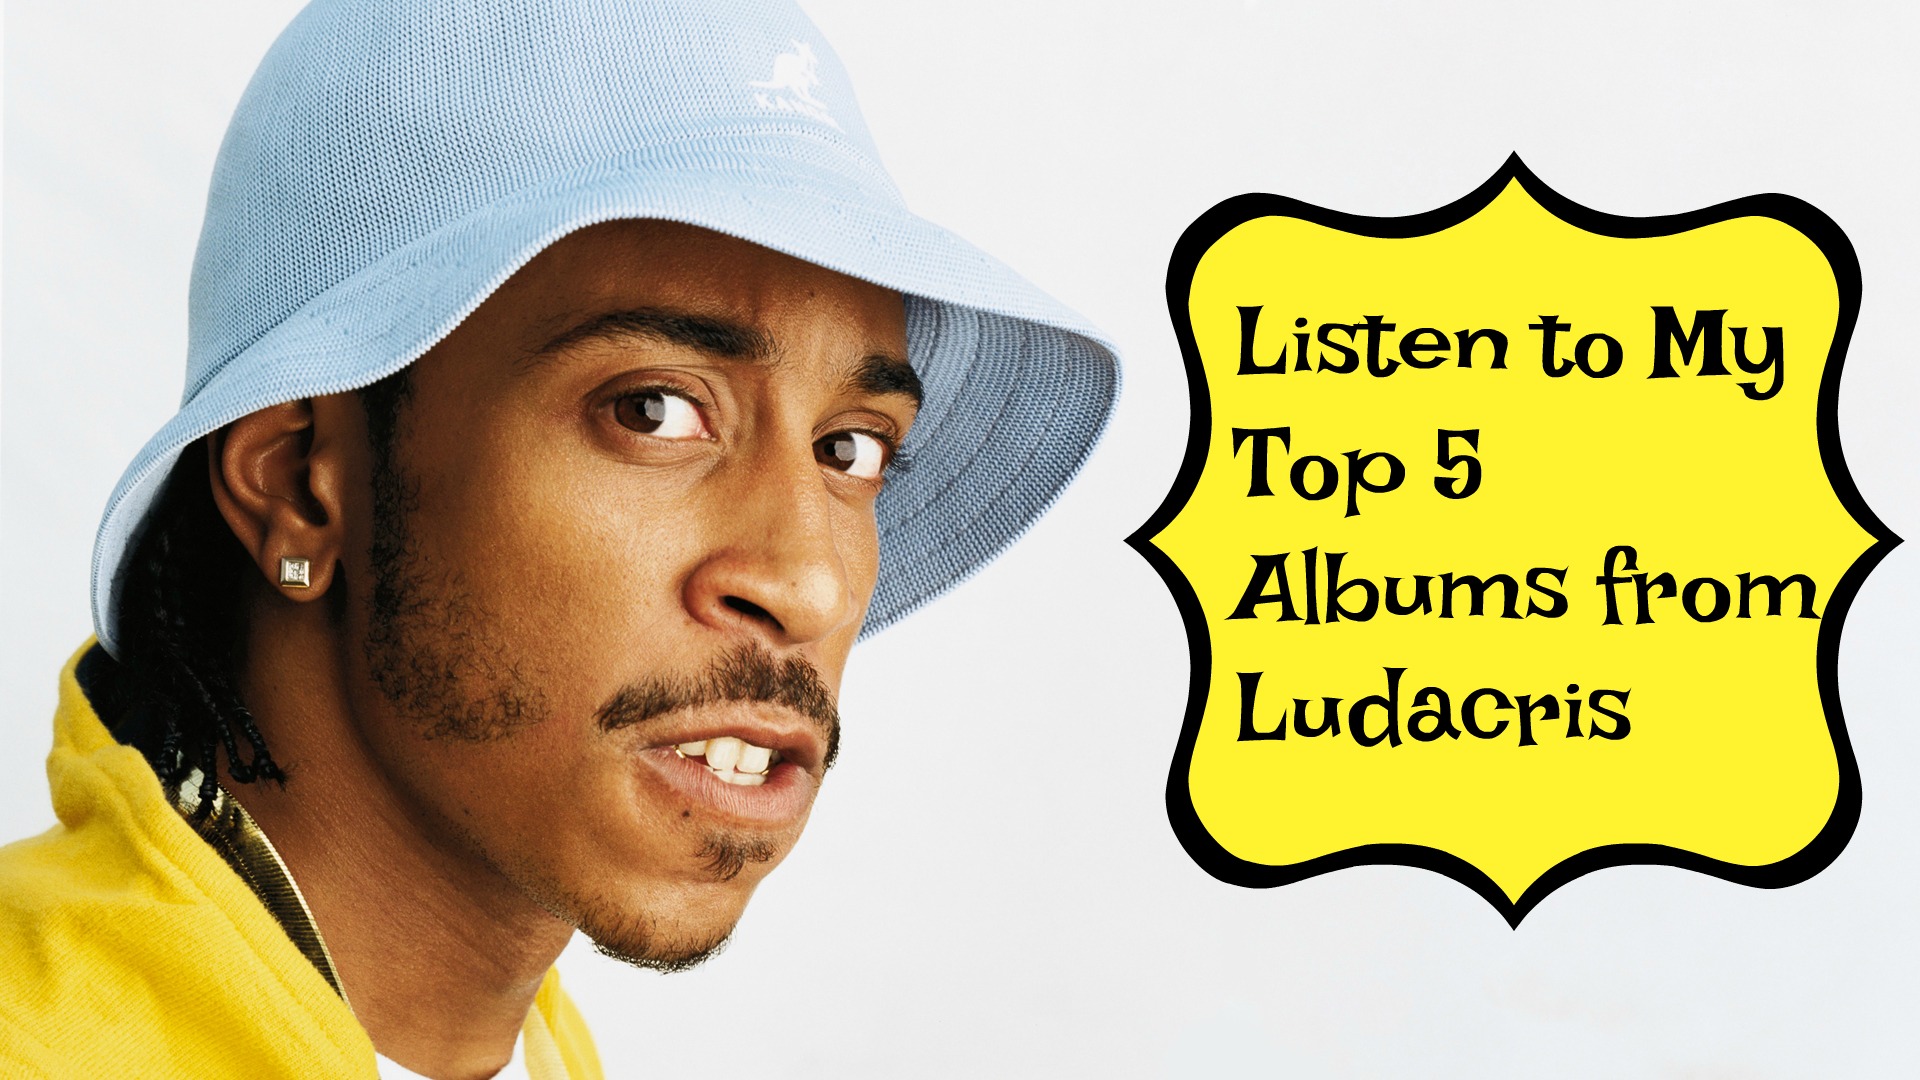 Listen to My Top 5 Albums from Ludacris